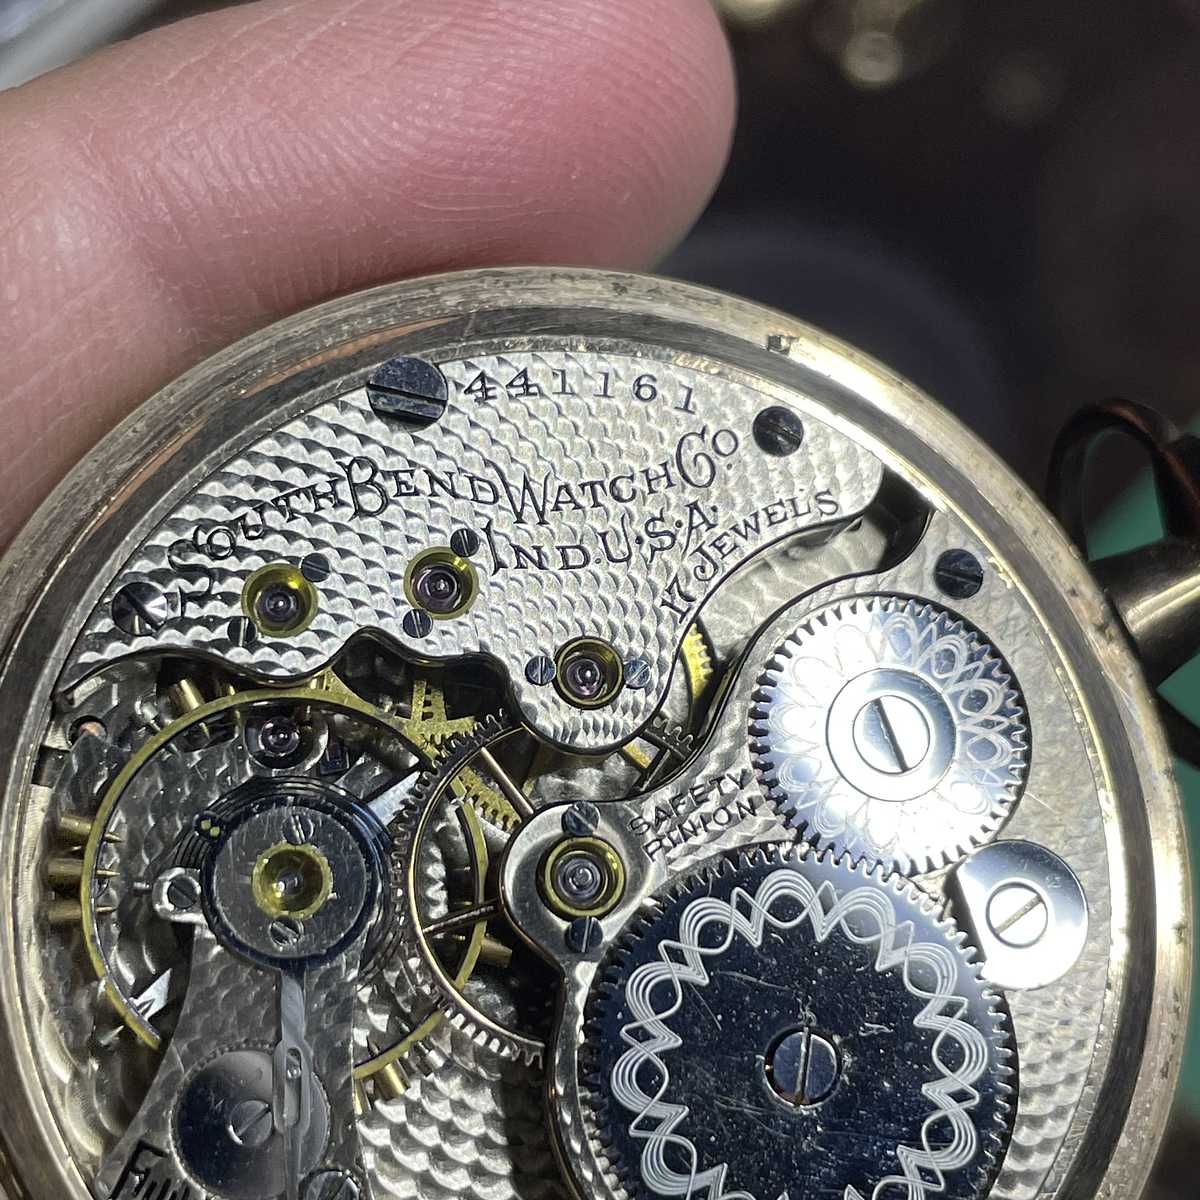 1906 South Bend Watch Grade 290 Close up of movement in pocket watch case